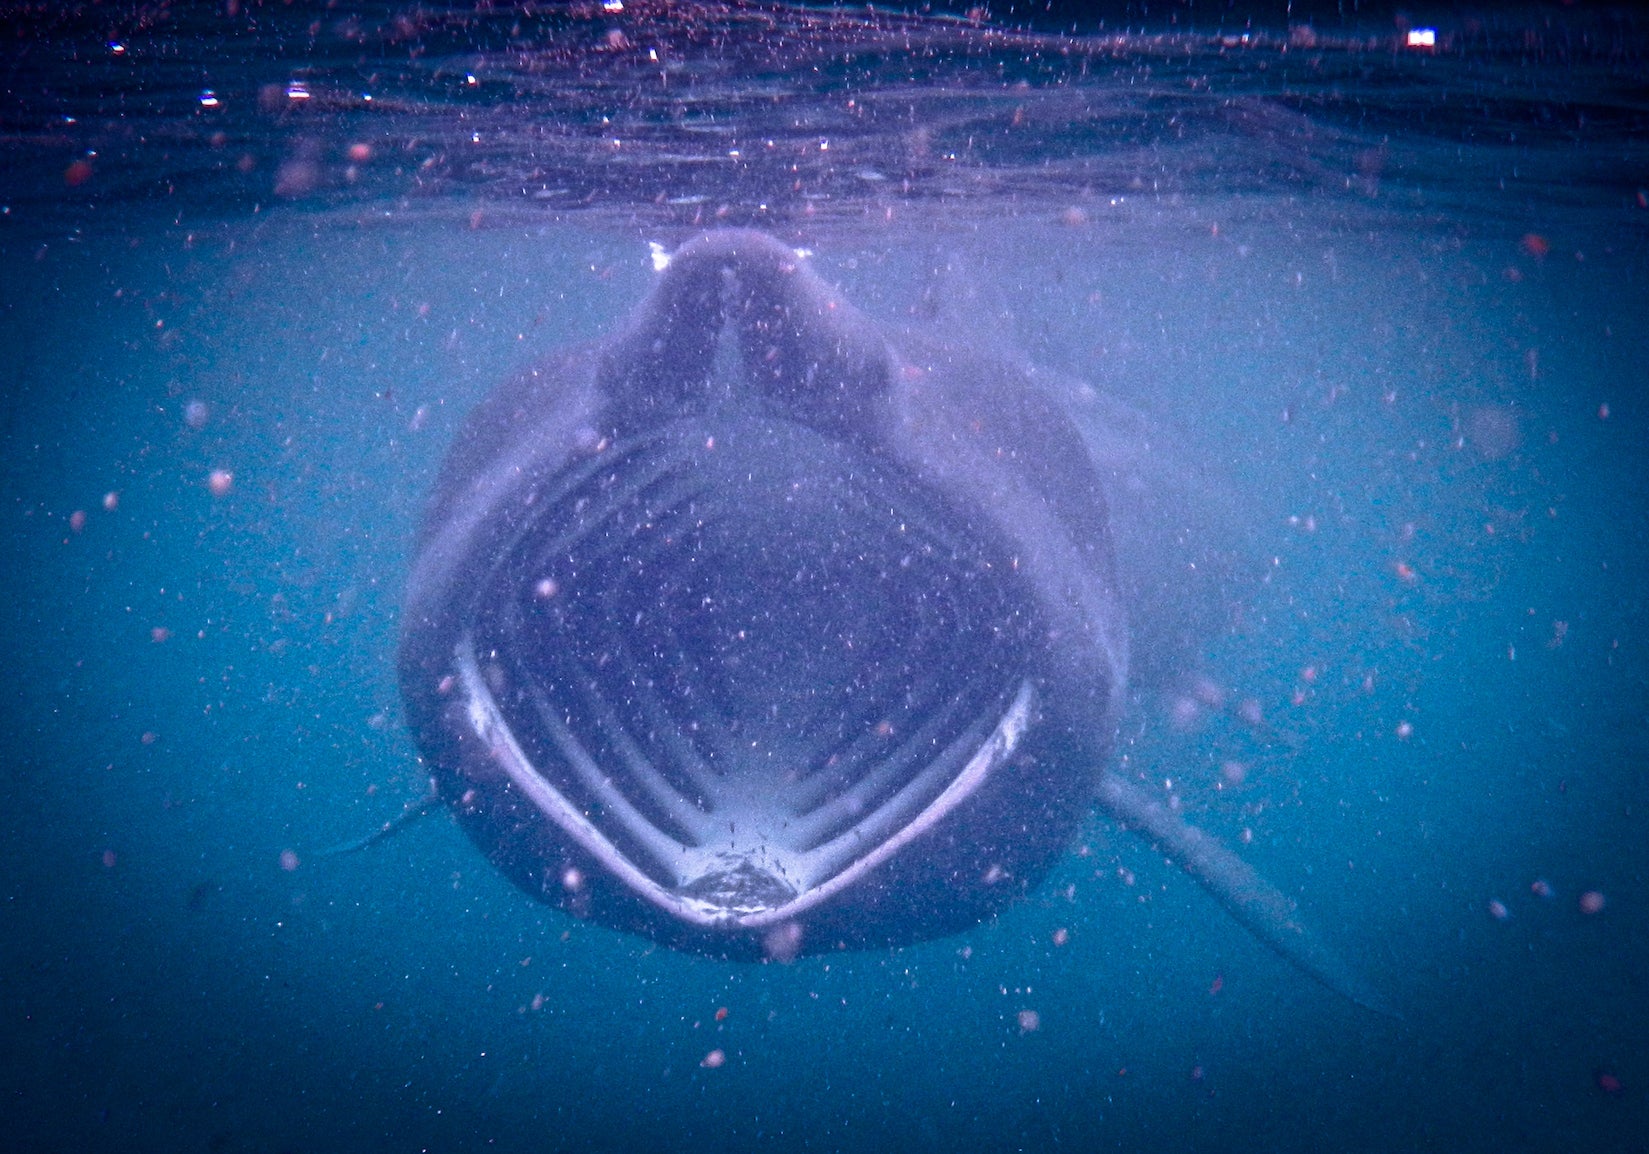 wide open mouth of basking shark swimming underwater